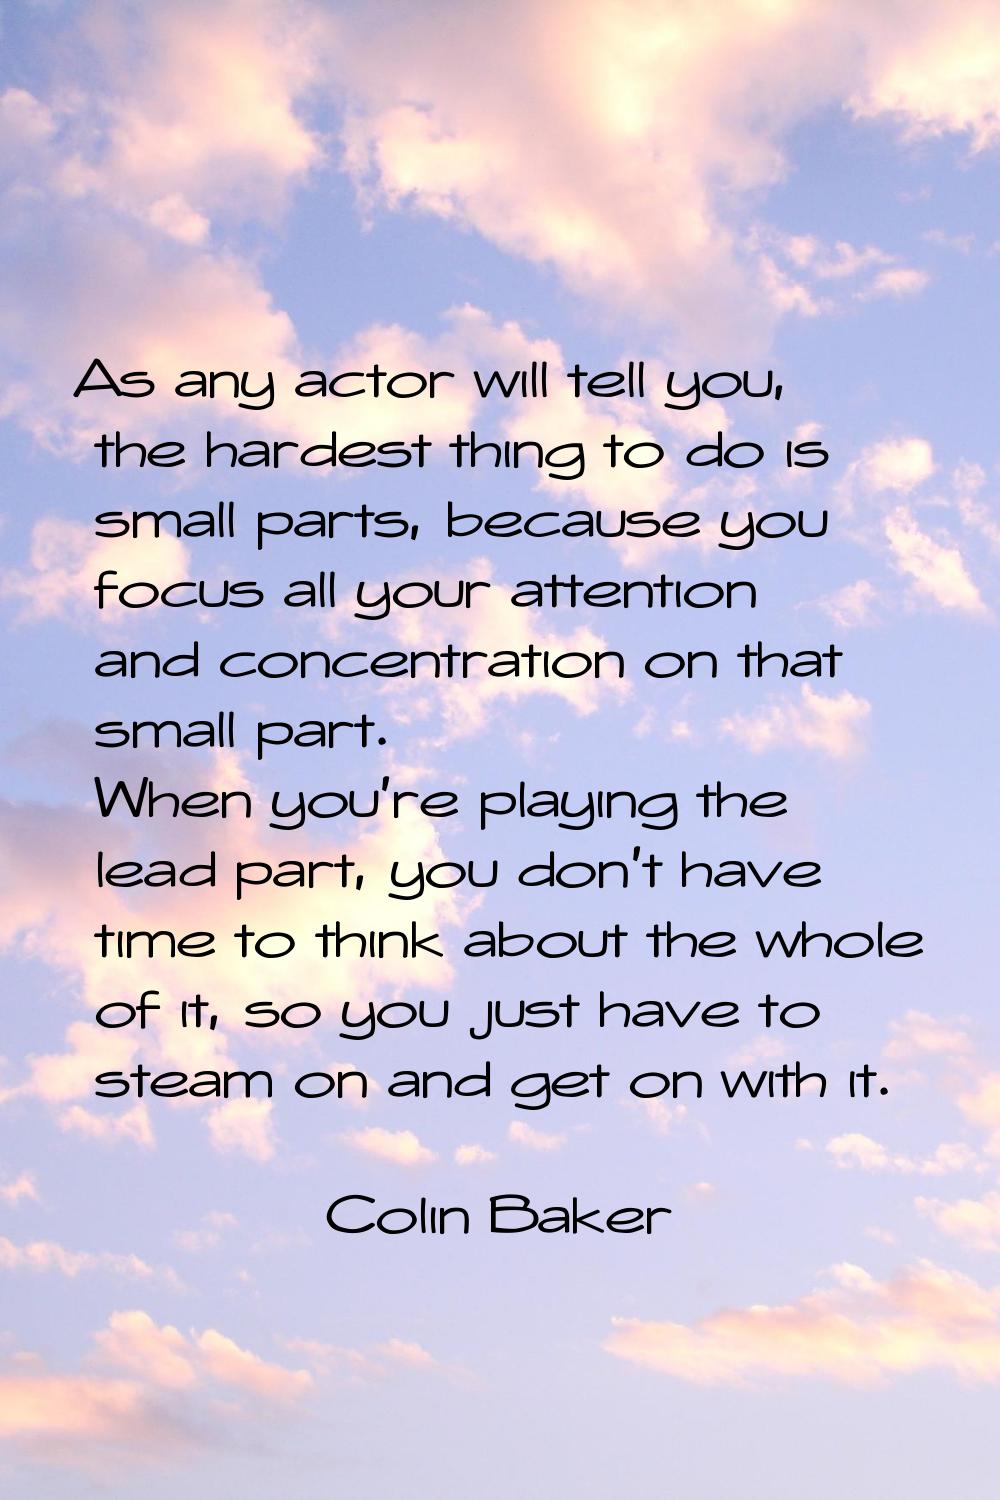 As any actor will tell you, the hardest thing to do is small parts, because you focus all your atte